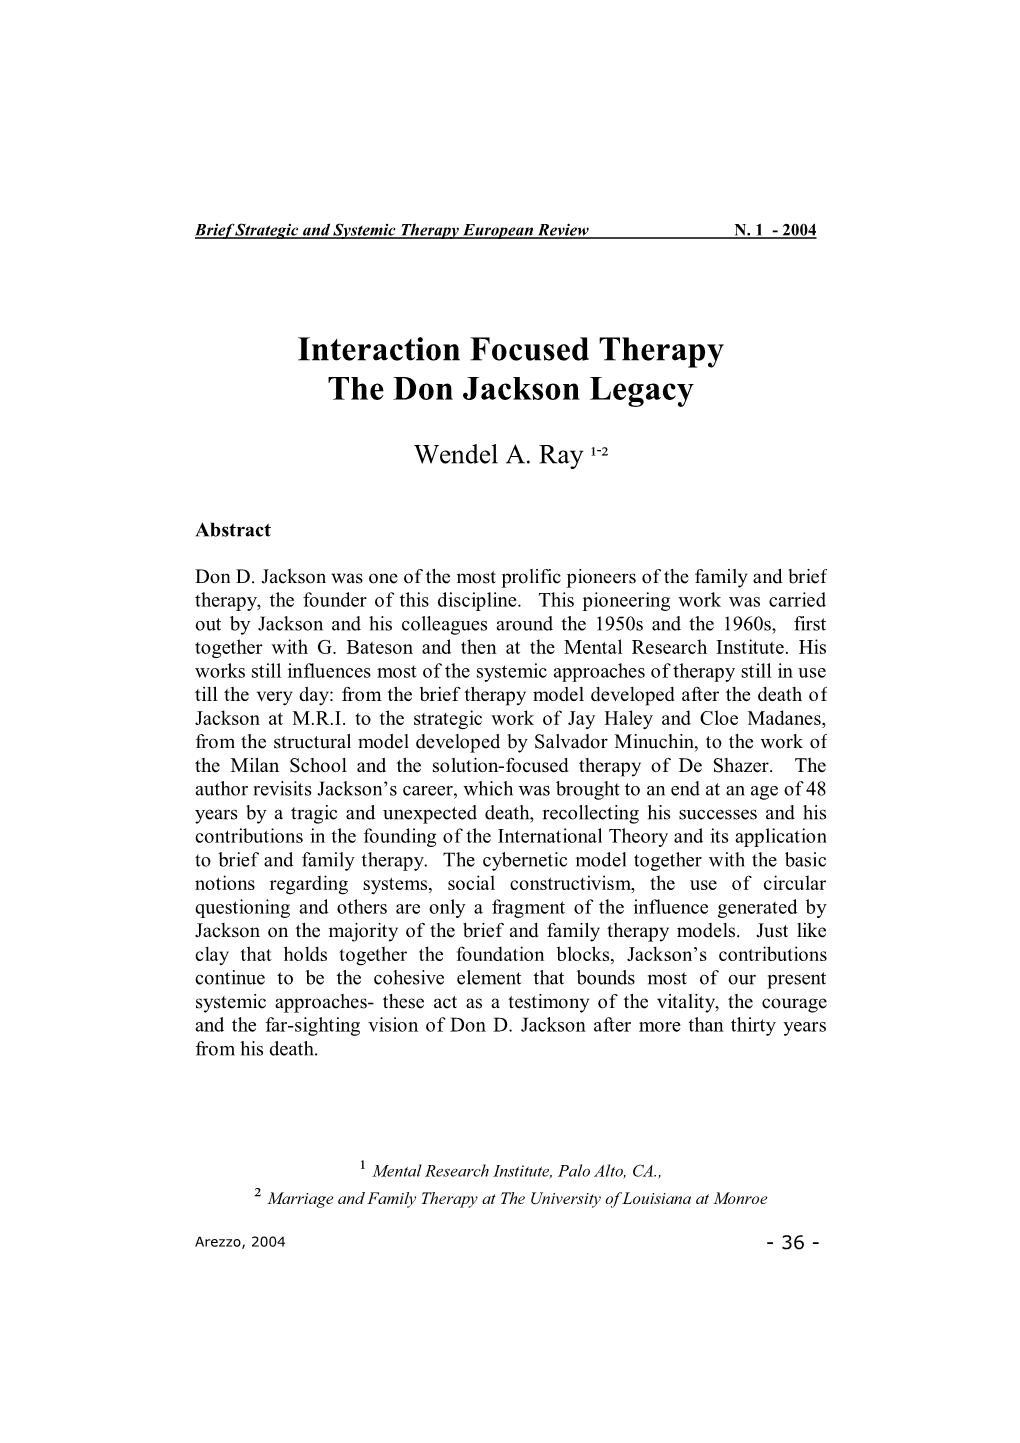 Interaction Focused Therapy the Don Jackson Legacy